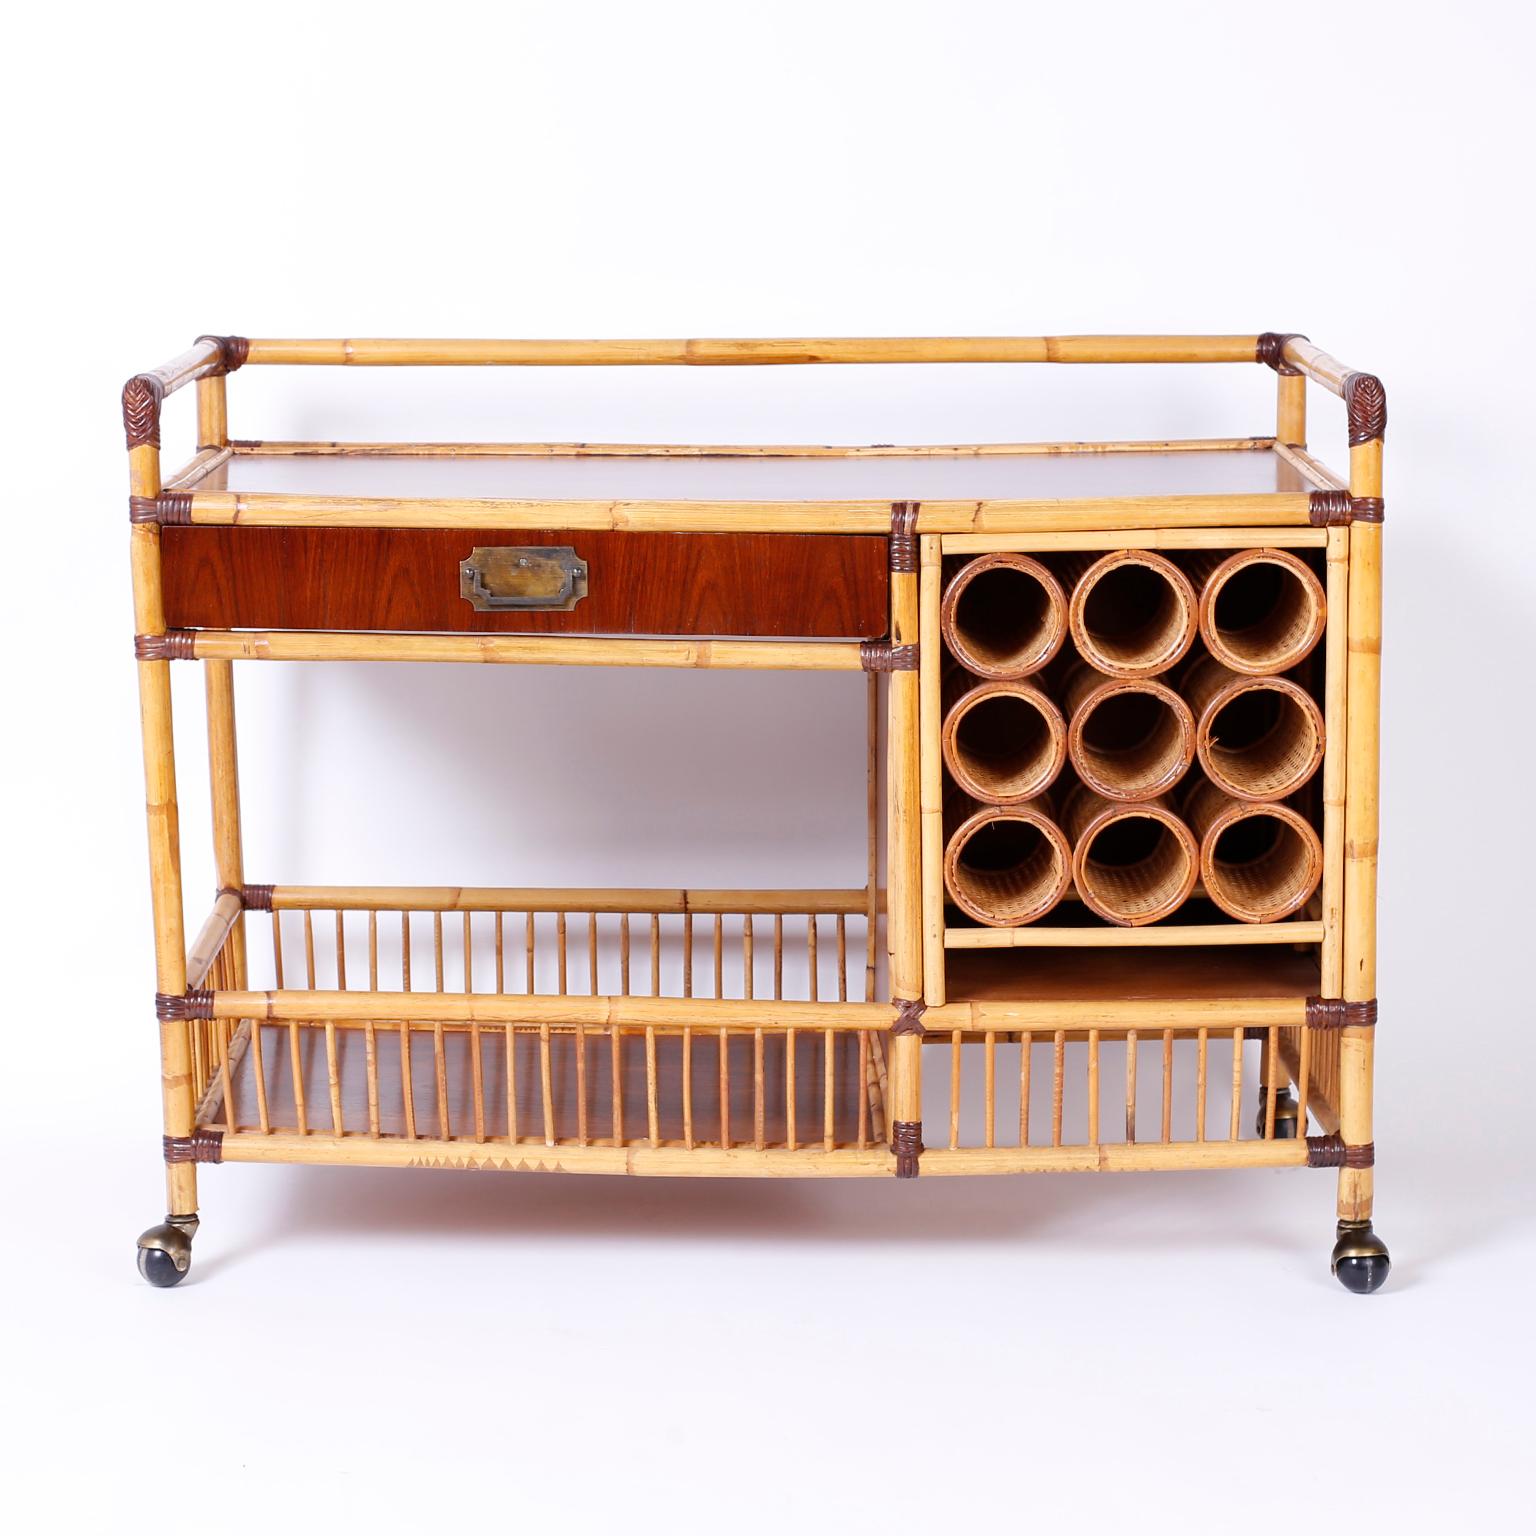 Swank midcentury bamboo and mahogany bar cart with rattan wrapped
corners, service space, one drawer, a wine rack and storage below.
Finished all the way around and gliding on wheels.